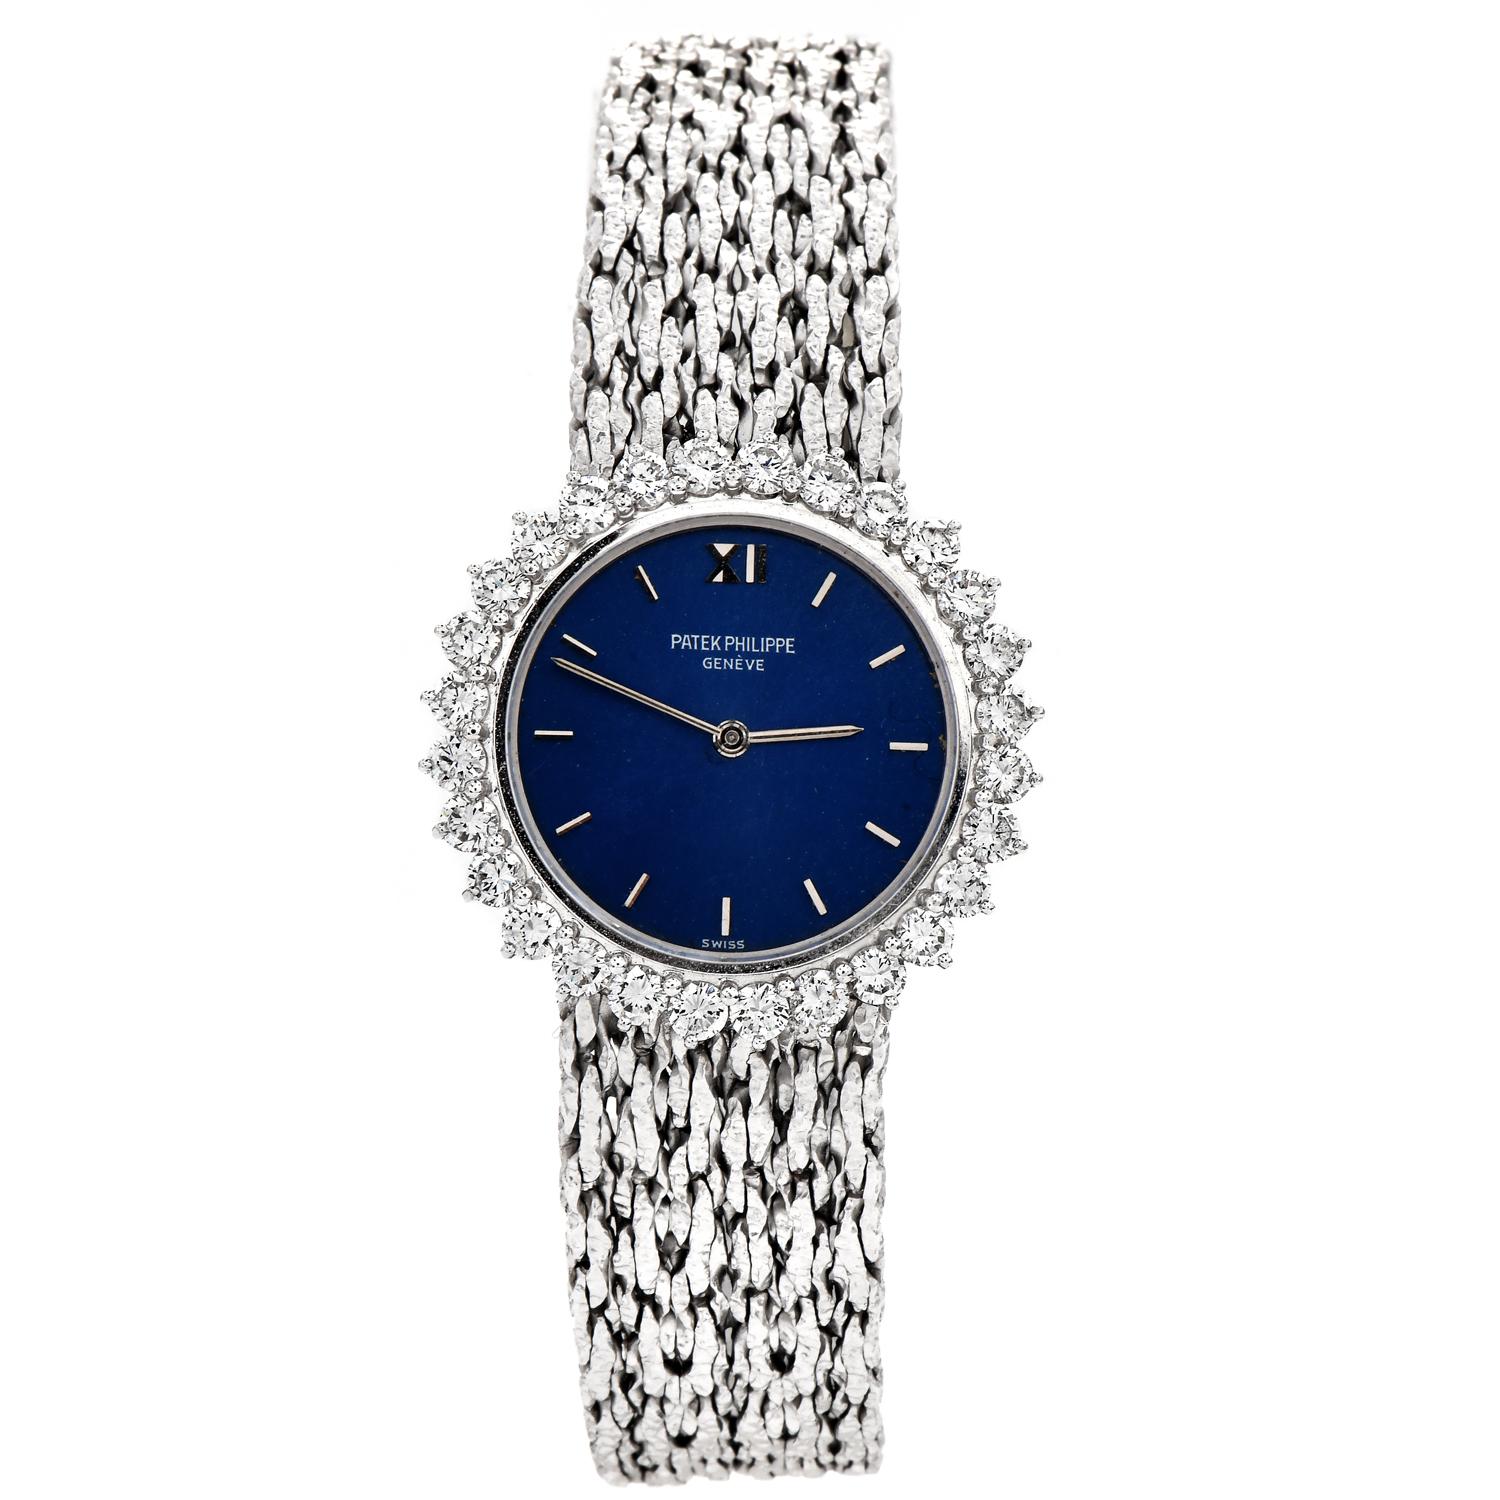 This exquisite all-original Patek Philippe ladies' watch is crafted in 18k white gold. The case presents an attractive royal blue dial embraced by 29 Factory set round brilliant cut diamonds approx. 1.70cttw, F-G color, VVS clarity. The band exposes